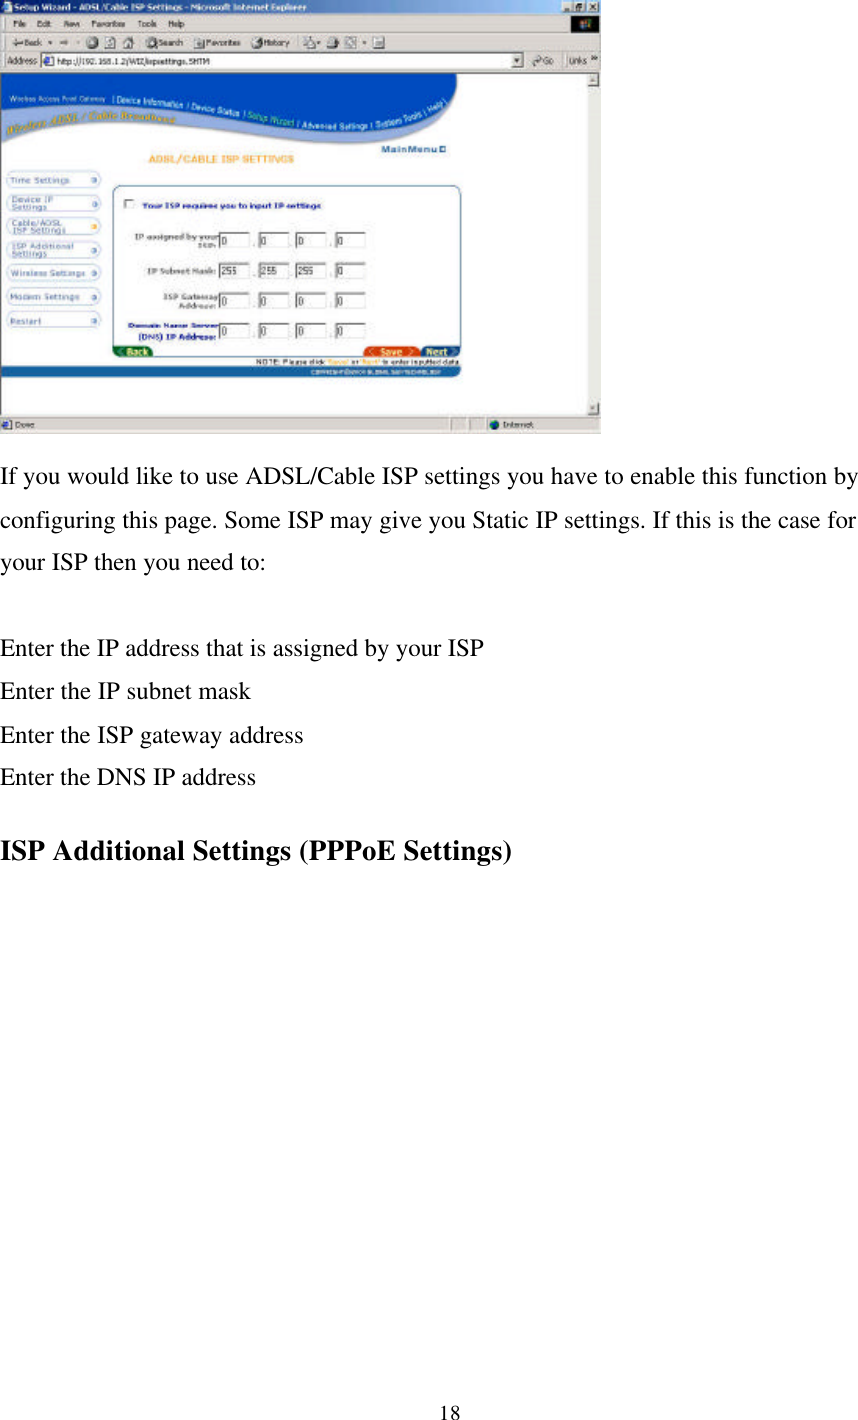 18If you would like to use ADSL/Cable ISP settings you have to enable this function byconfiguring this page. Some ISP may give you Static IP settings. If this is the case foryour ISP then you need to:Enter the IP address that is assigned by your ISPEnter the IP subnet maskEnter the ISP gateway addressEnter the DNS IP addressISP Additional Settings (PPPoE Settings)